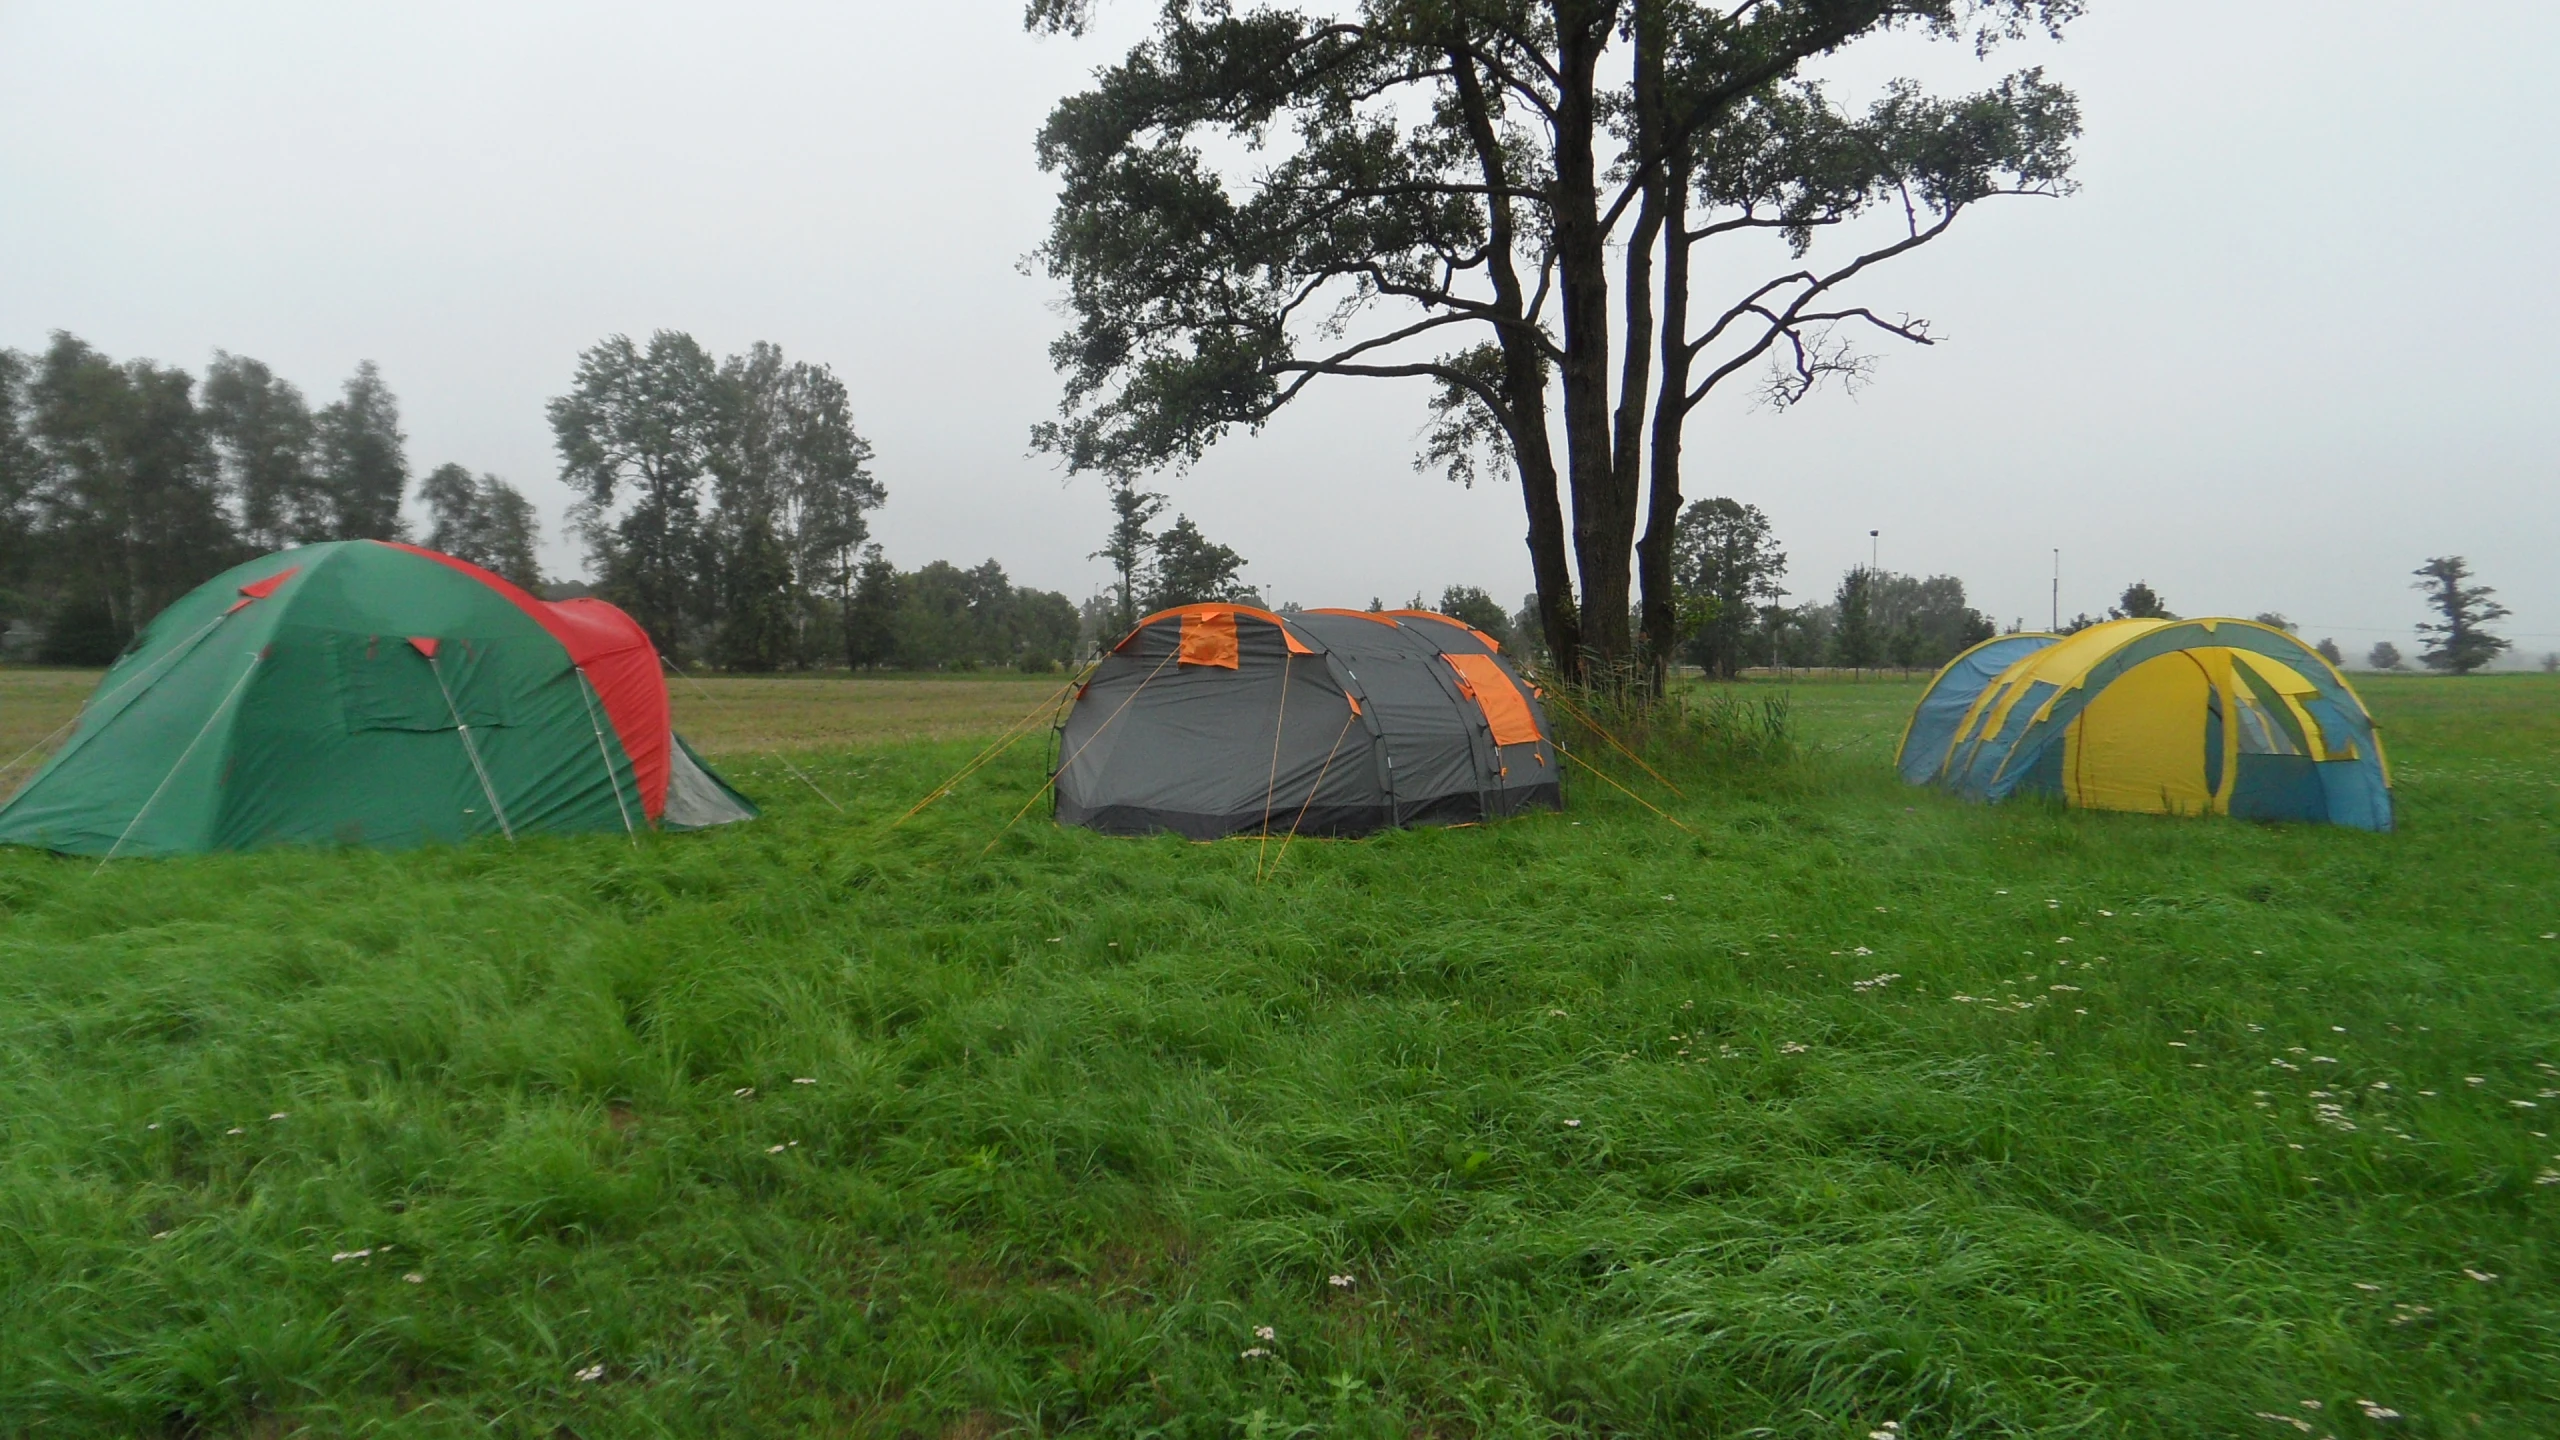 tents are lined up on the grass in front of a tree